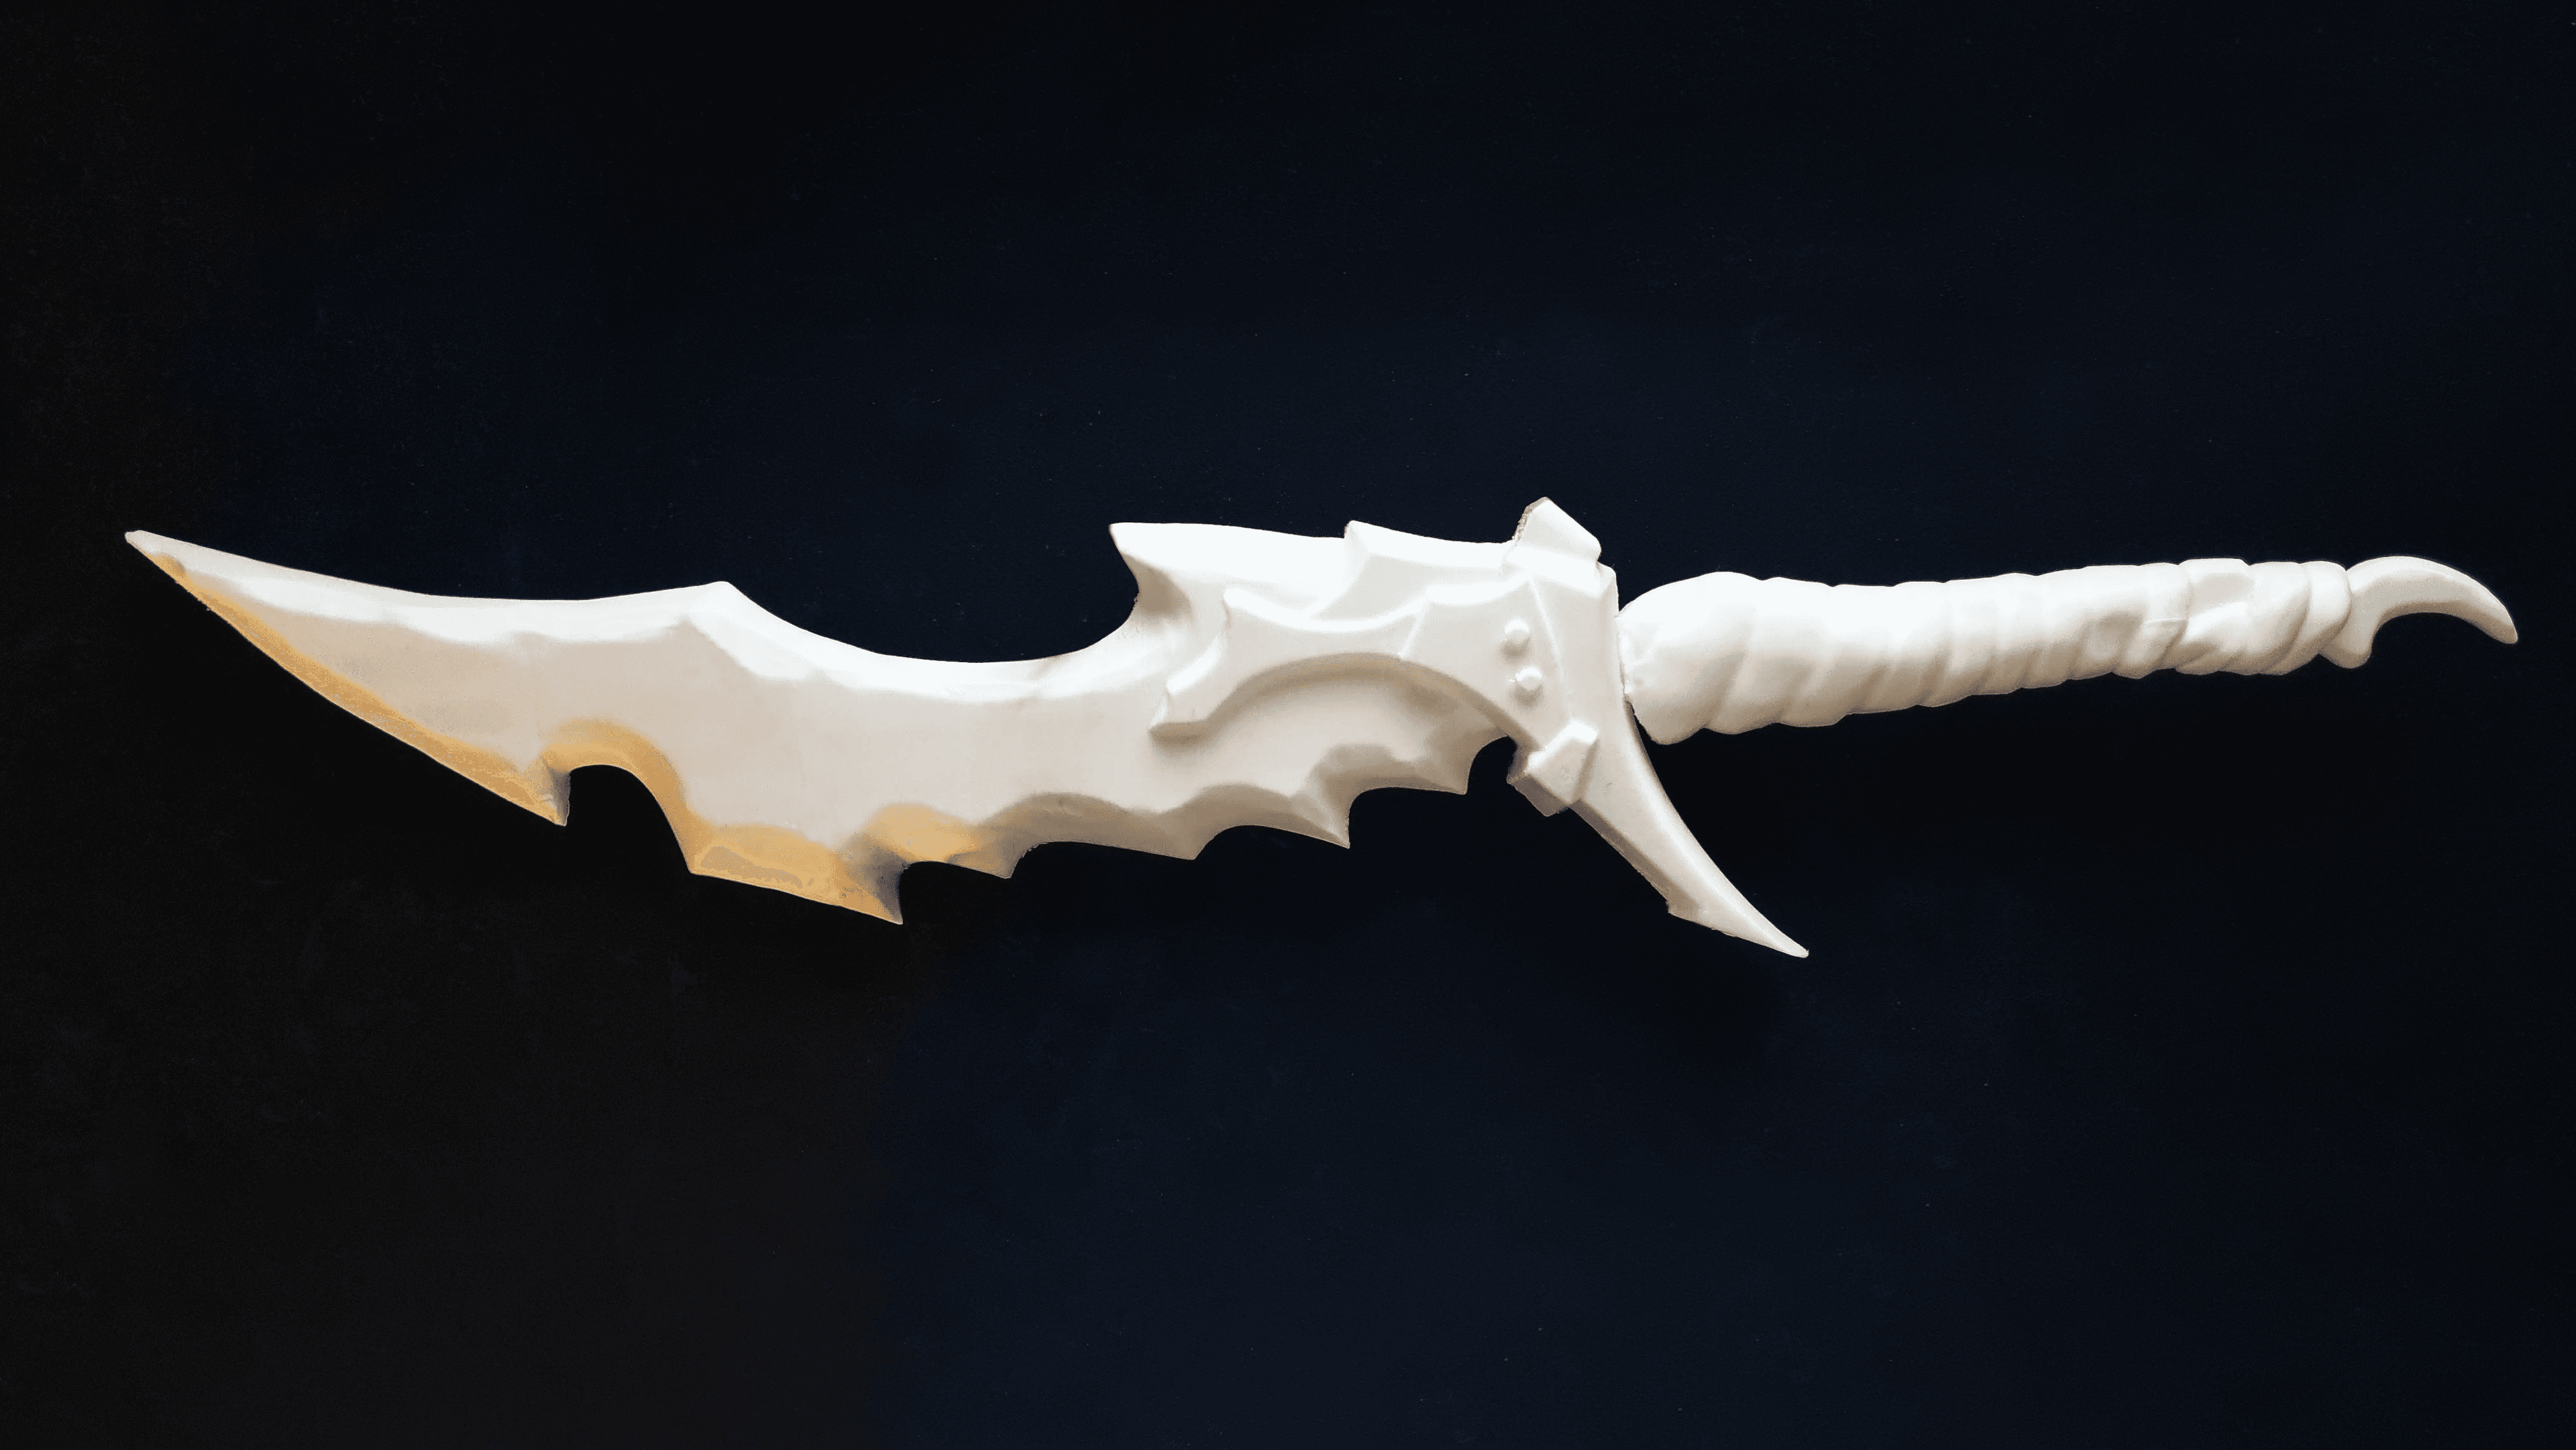 Knight Slayer Dagger from Solo Leveling Cosplay Prop 3d model